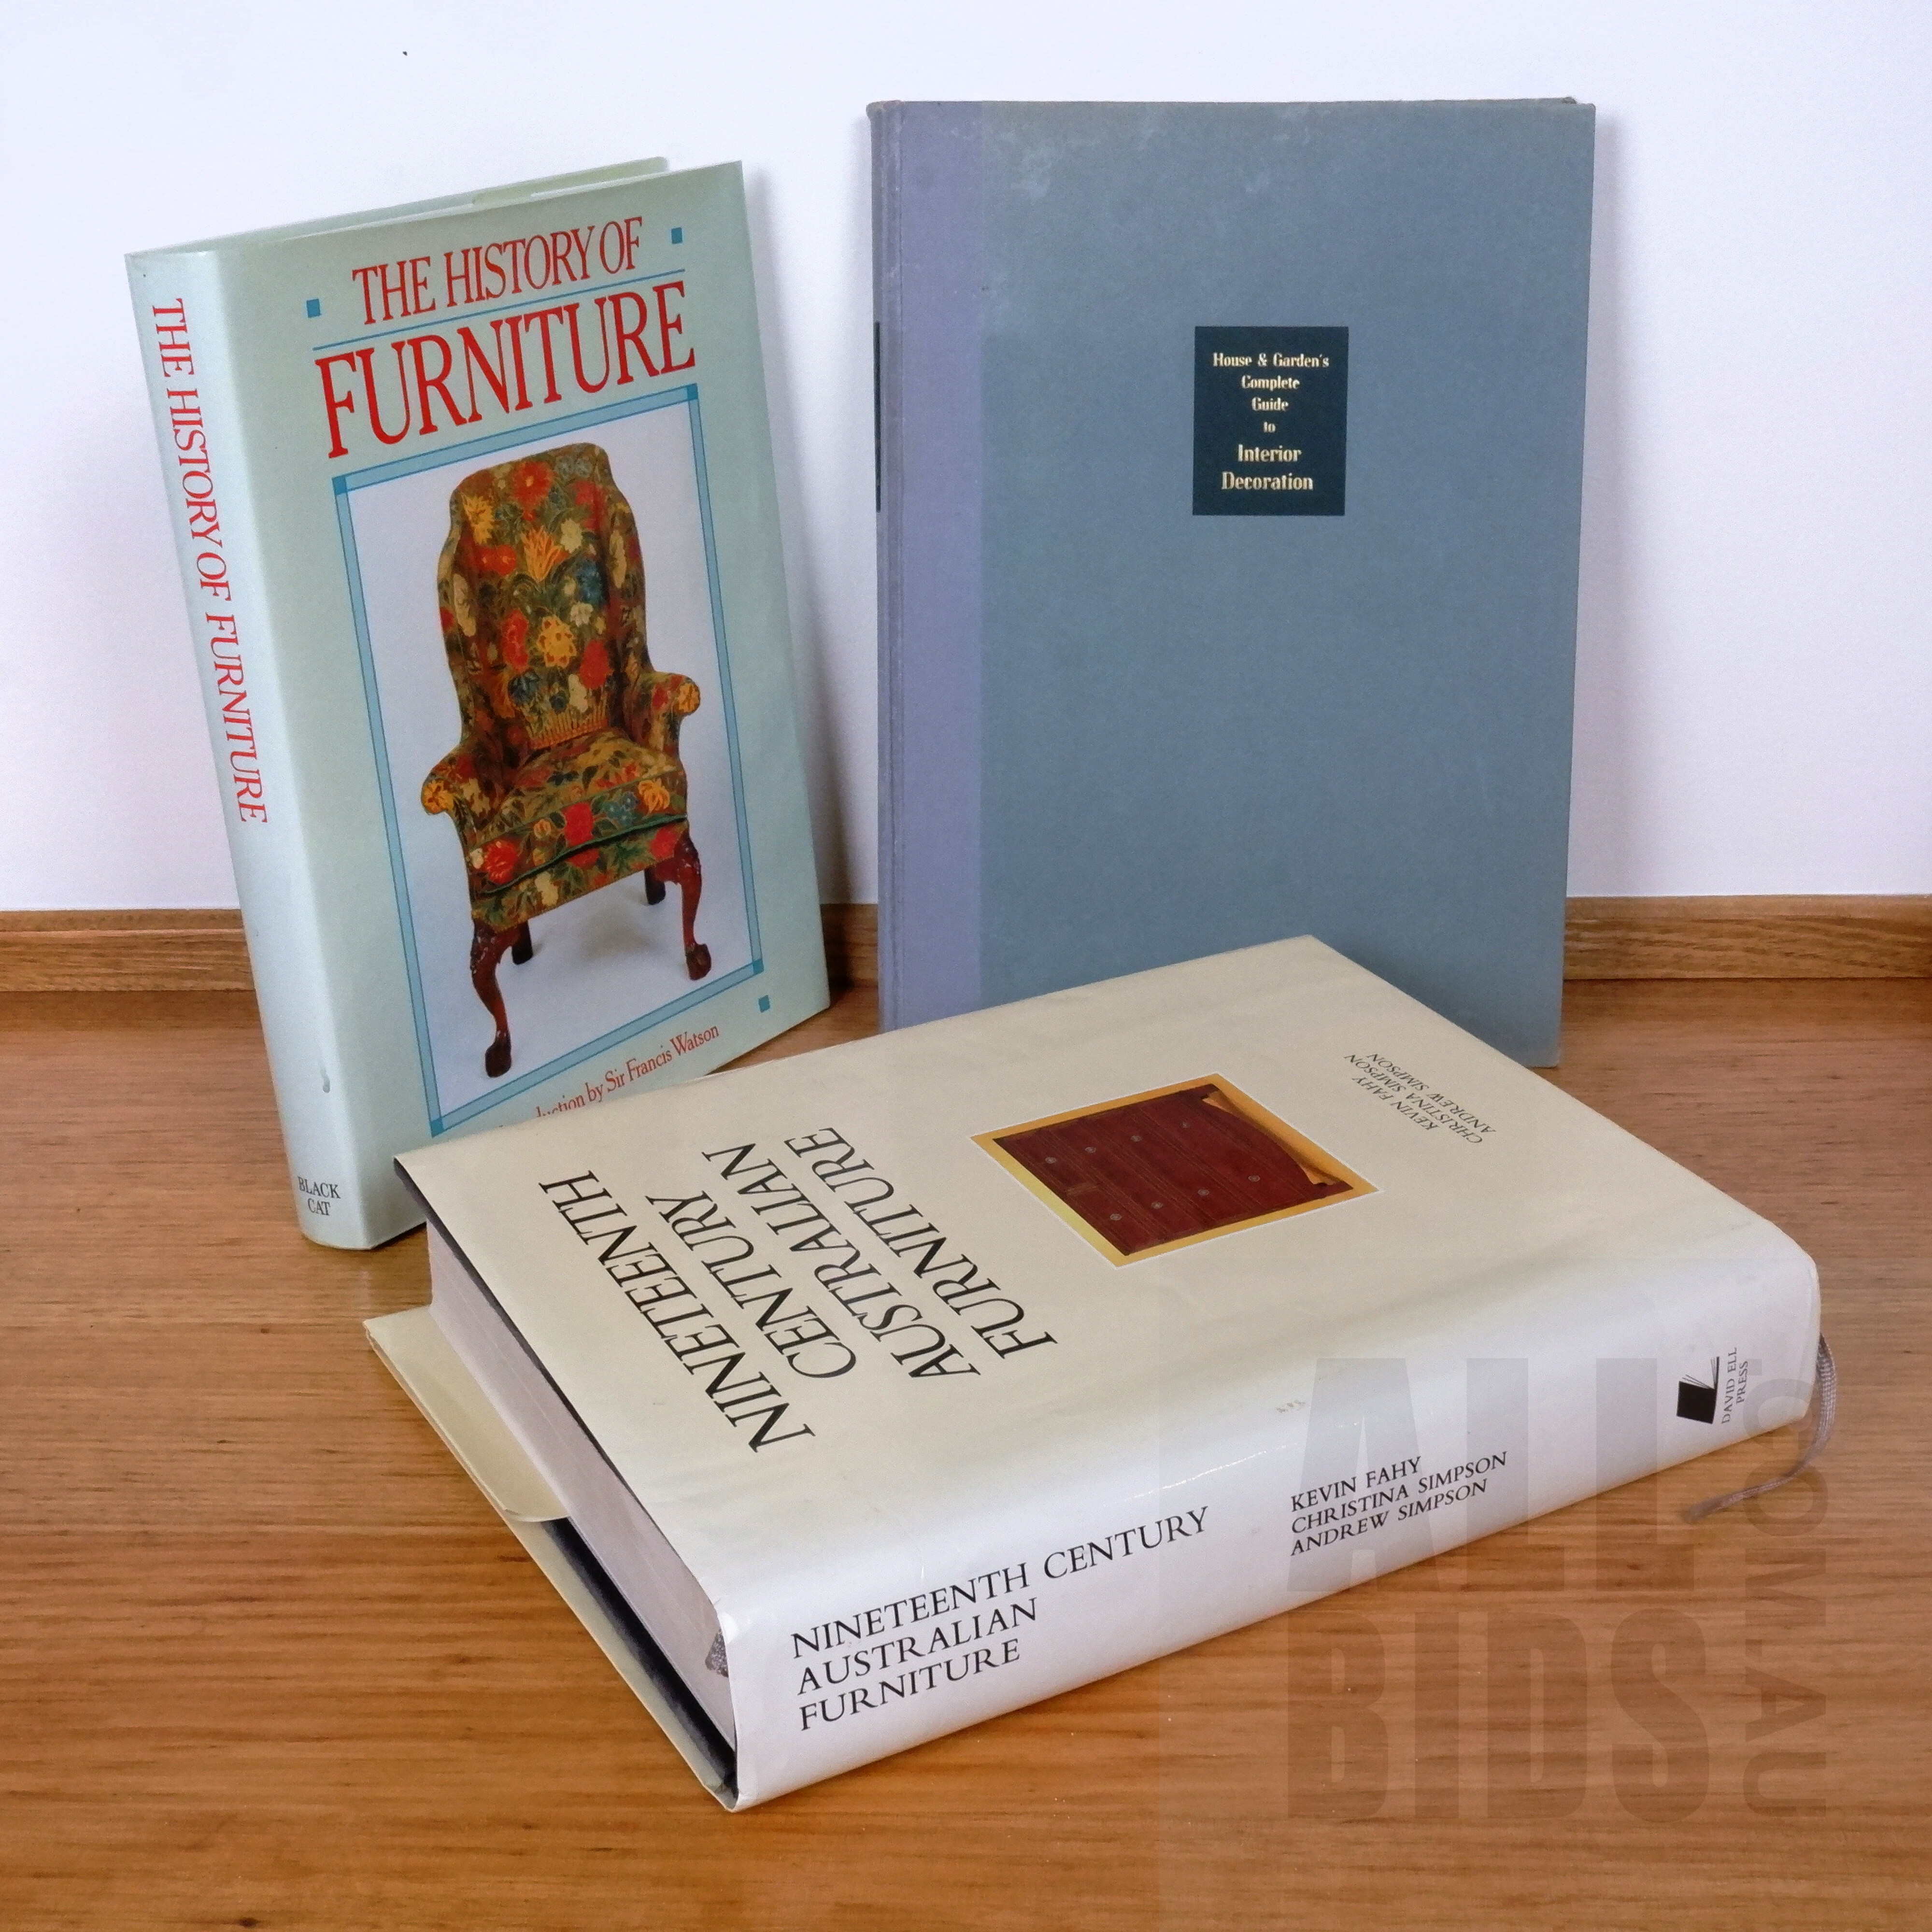 'Fahy and Simpson, Nineteenth Century Australian Furniture, and Two of Furniture Reference Books'